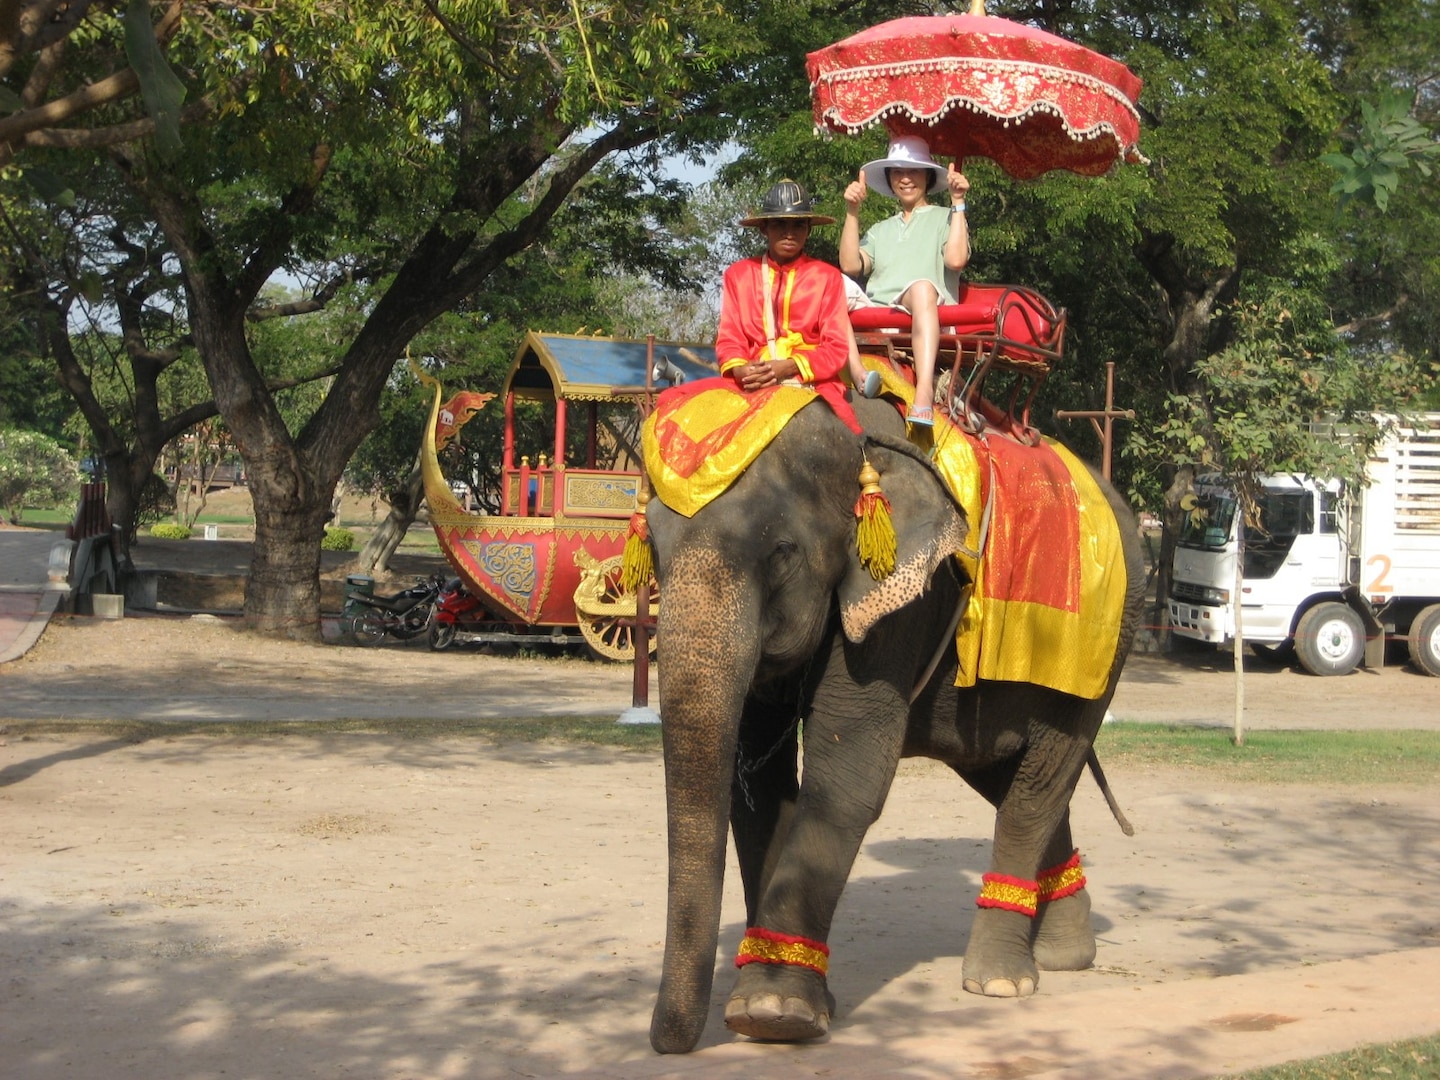 Julie Tsao enjoying an elephant ride while on vacation in Thailand.